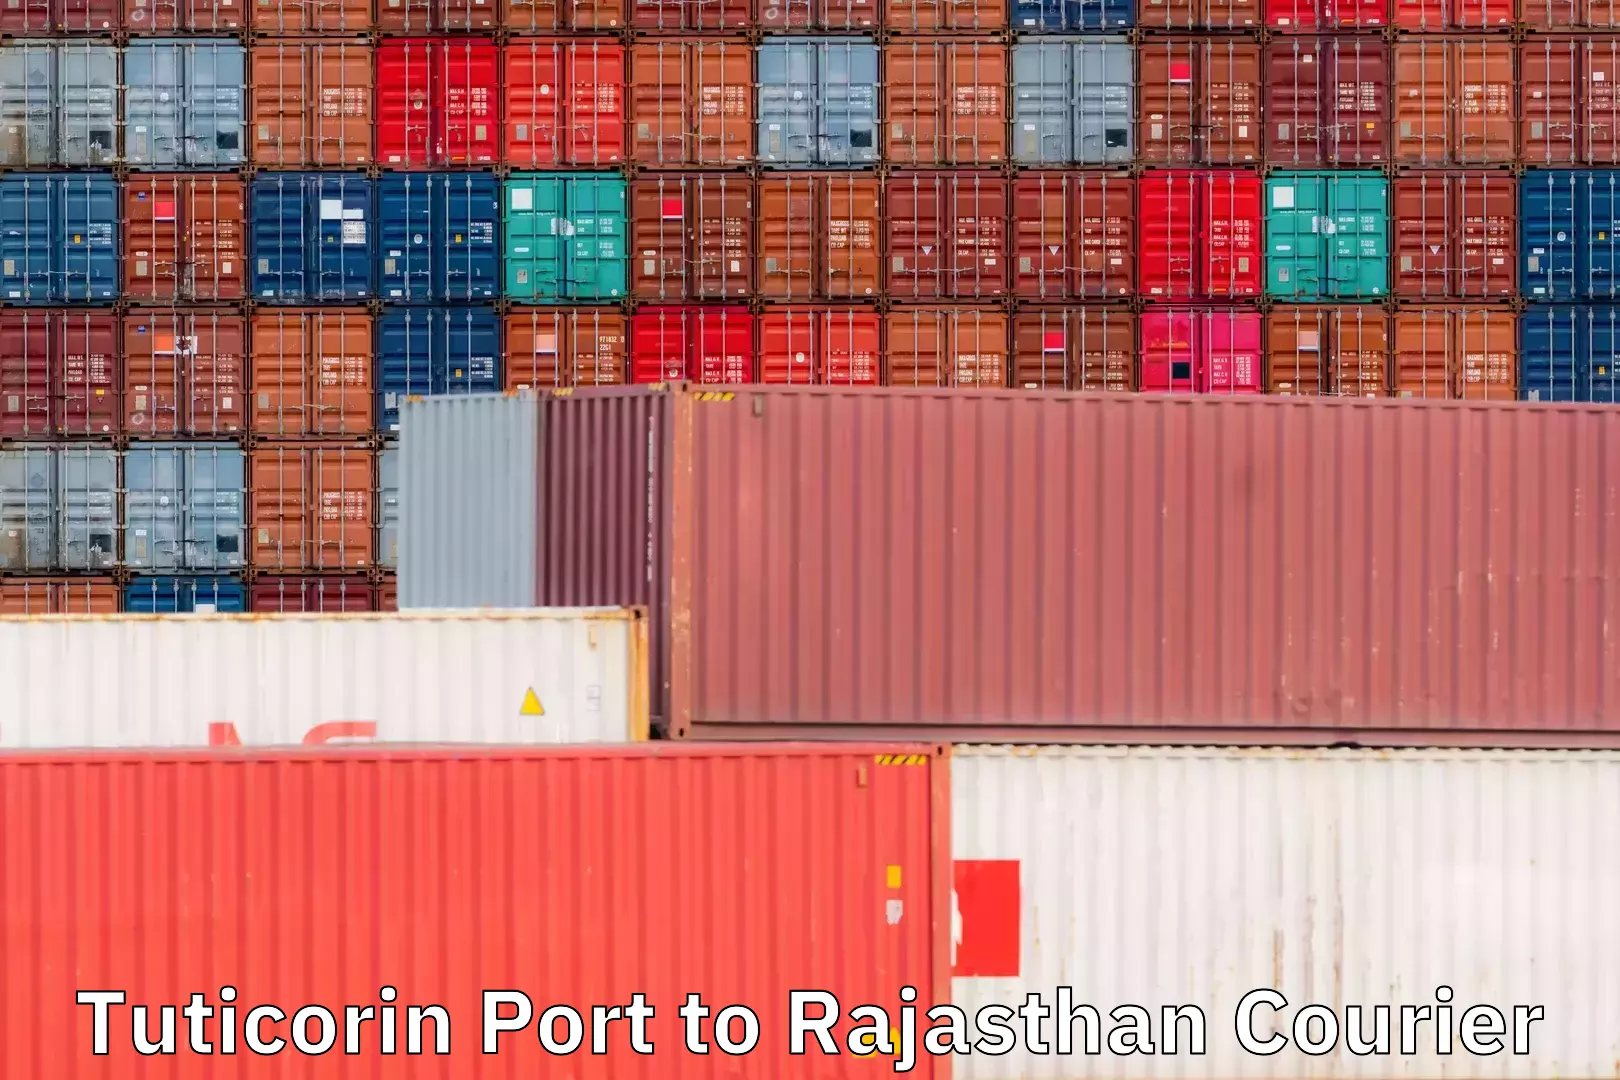 Express courier facilities Tuticorin Port to Rajasthan